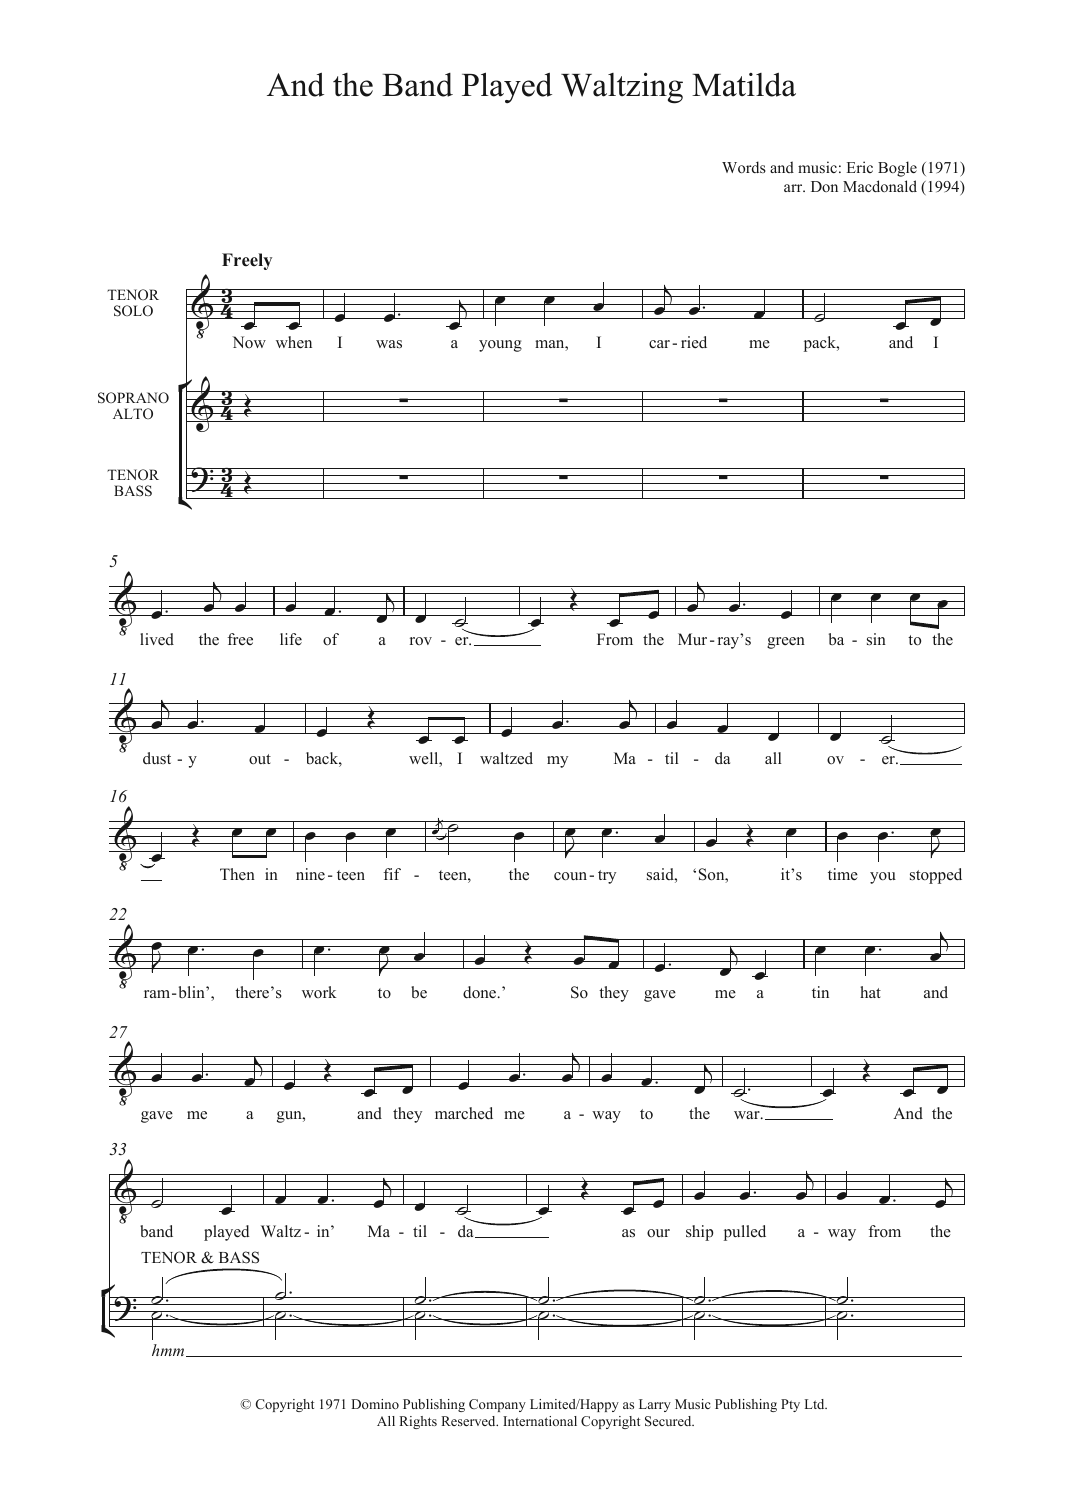 Download Eric Bogle And The Band Played Waltzing Matilda Sheet Music